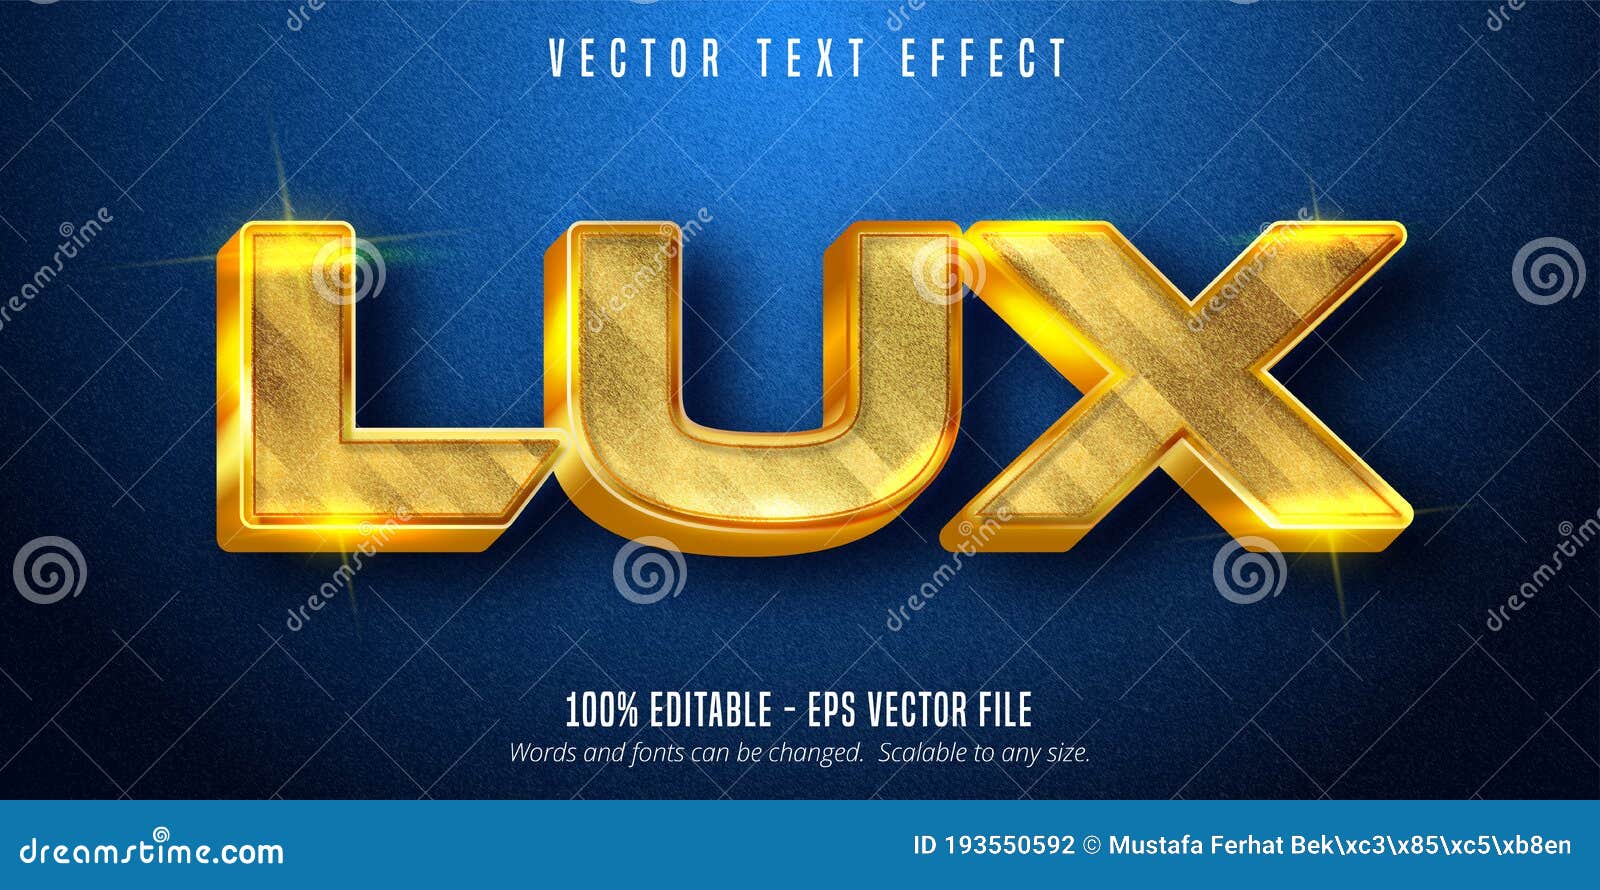 lux text, shiny golden style editable text effect